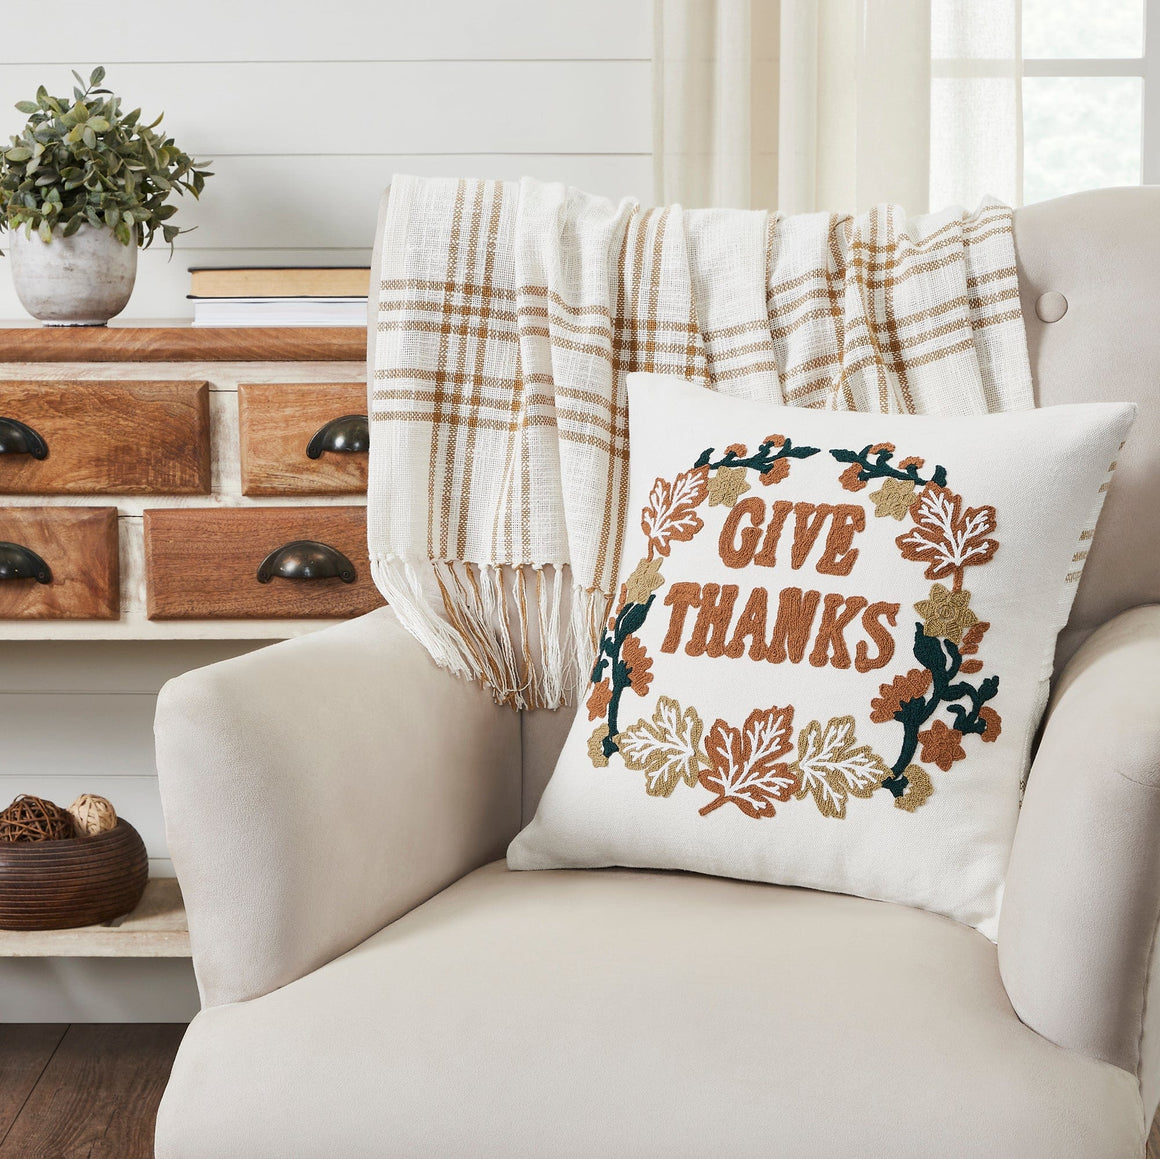 Give Thanks Embroidered Pillow